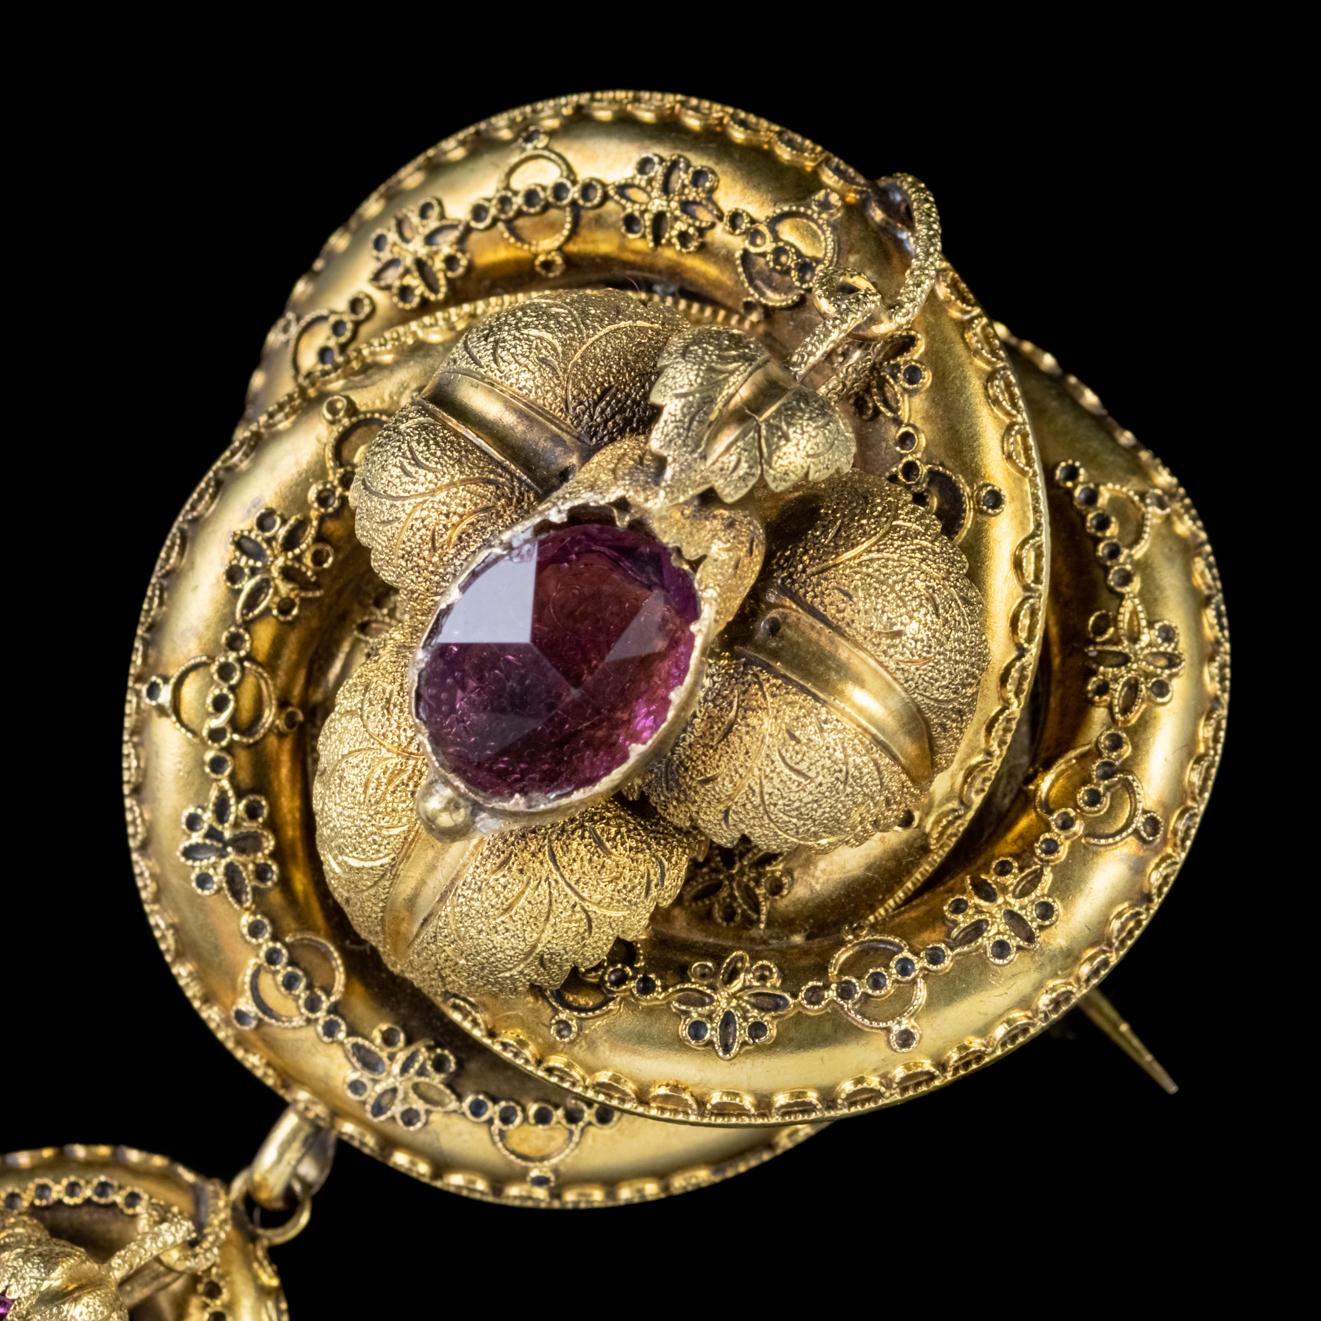 Antique Victorian Lovers Knot Brooch Amethyst 15 Carat Gold Locket, circa 1880 In Good Condition For Sale In Lancaster, Lancashire